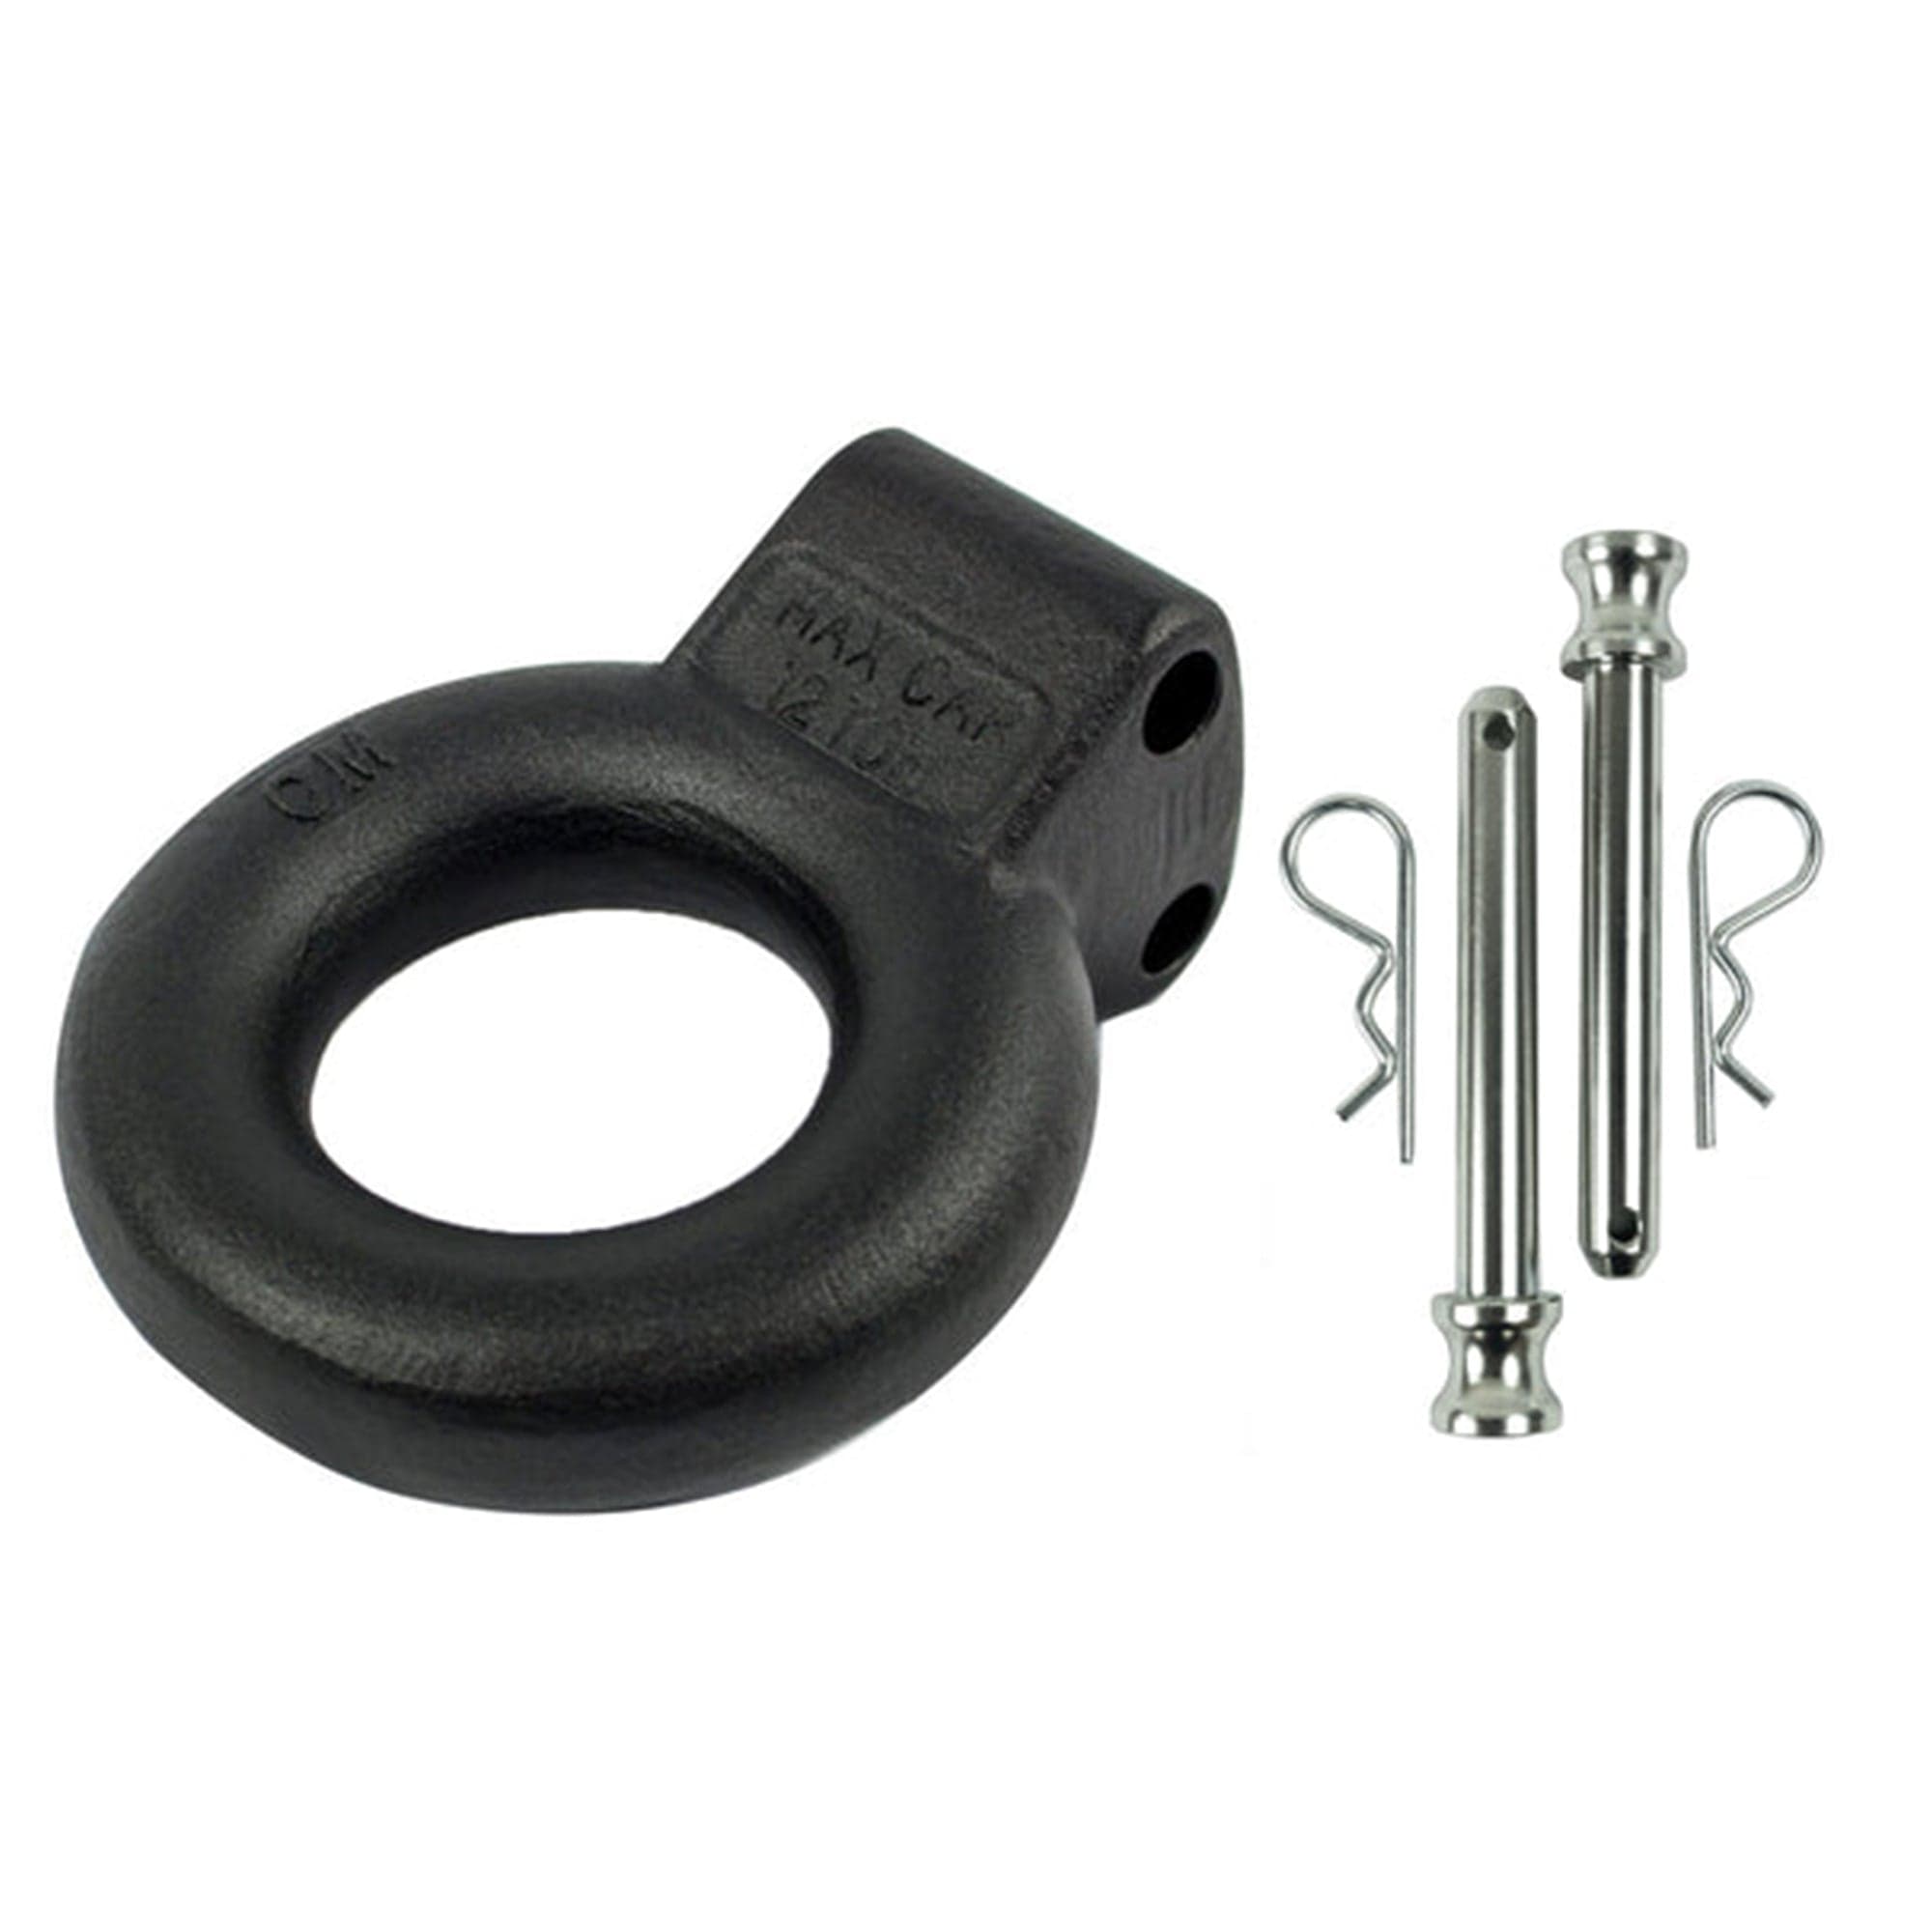 Bulletproof Hitches LOOP Lunette Ring/Loop Hitch Attachment